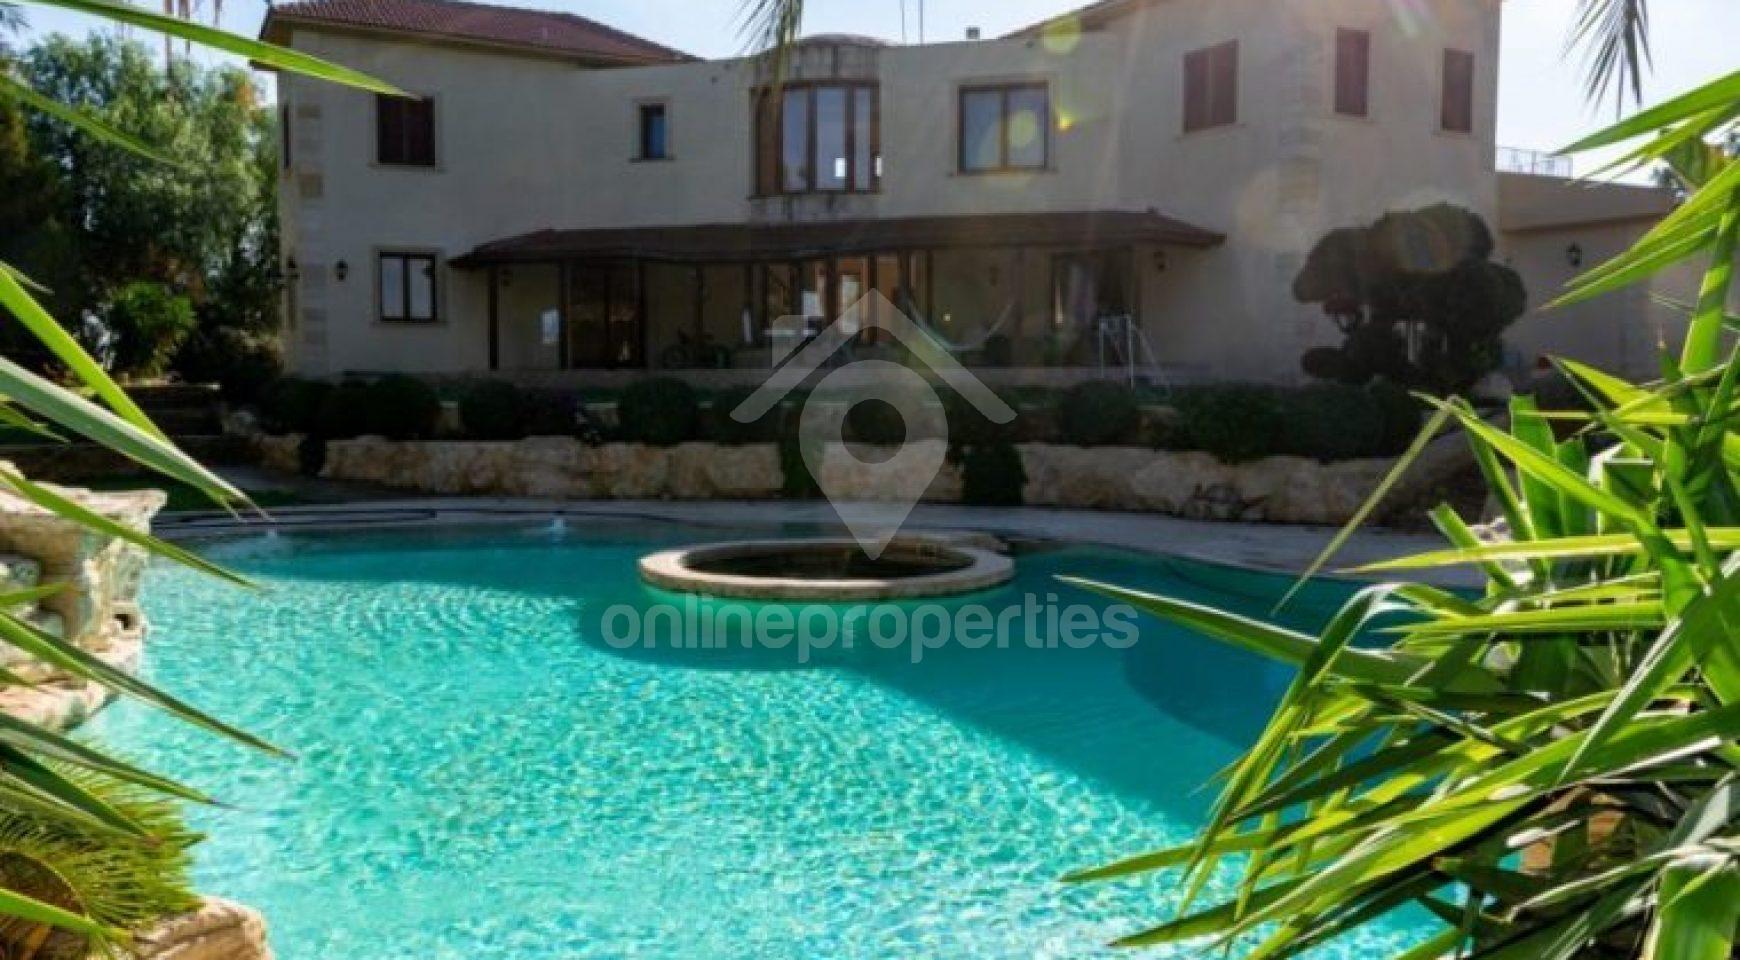 5 Bedroom House near GSP Stadium with beautiful garden and swimming pool